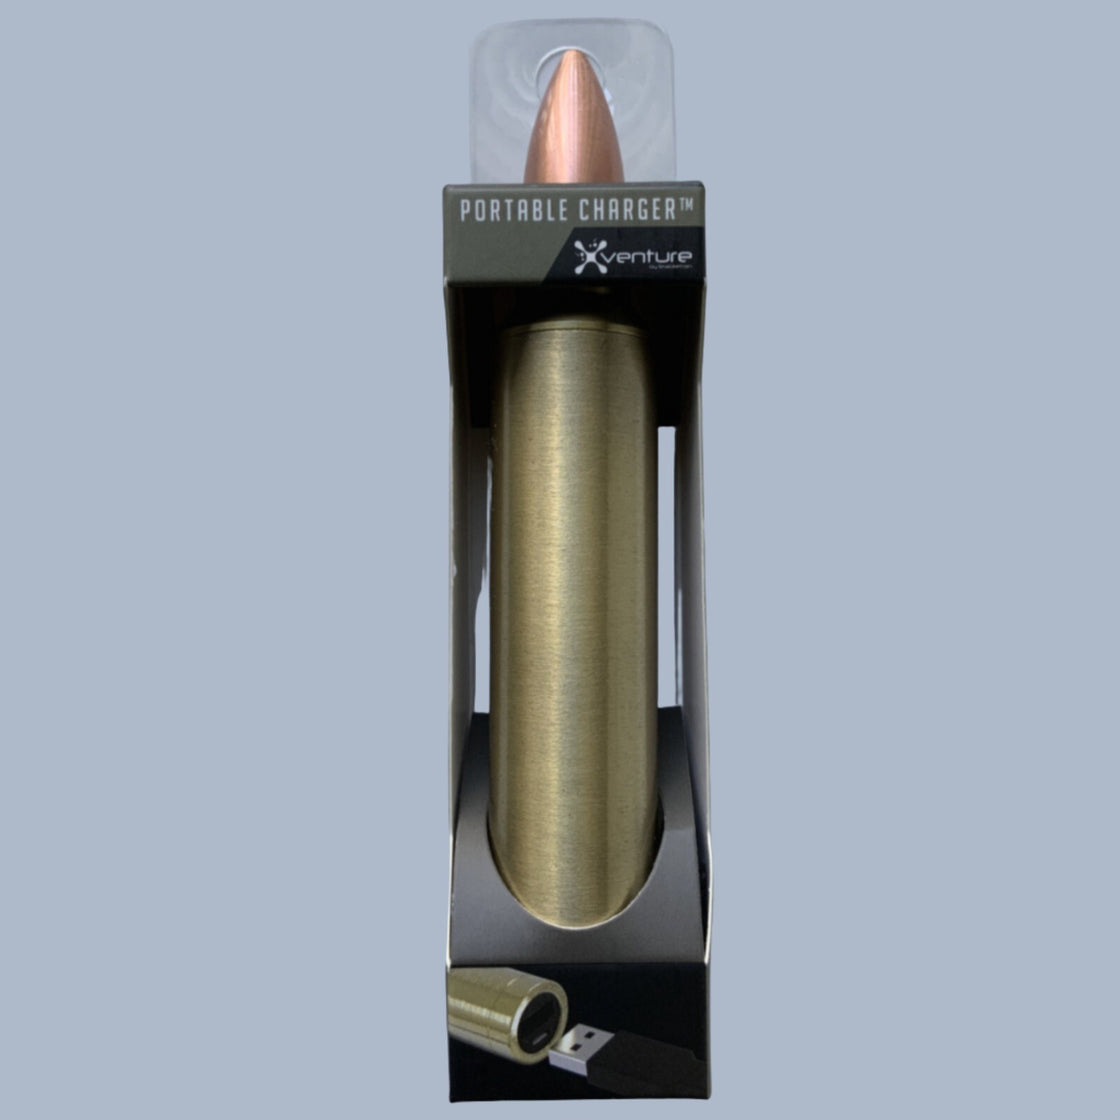 Xventure Reload .50 Caliber Portable Charger